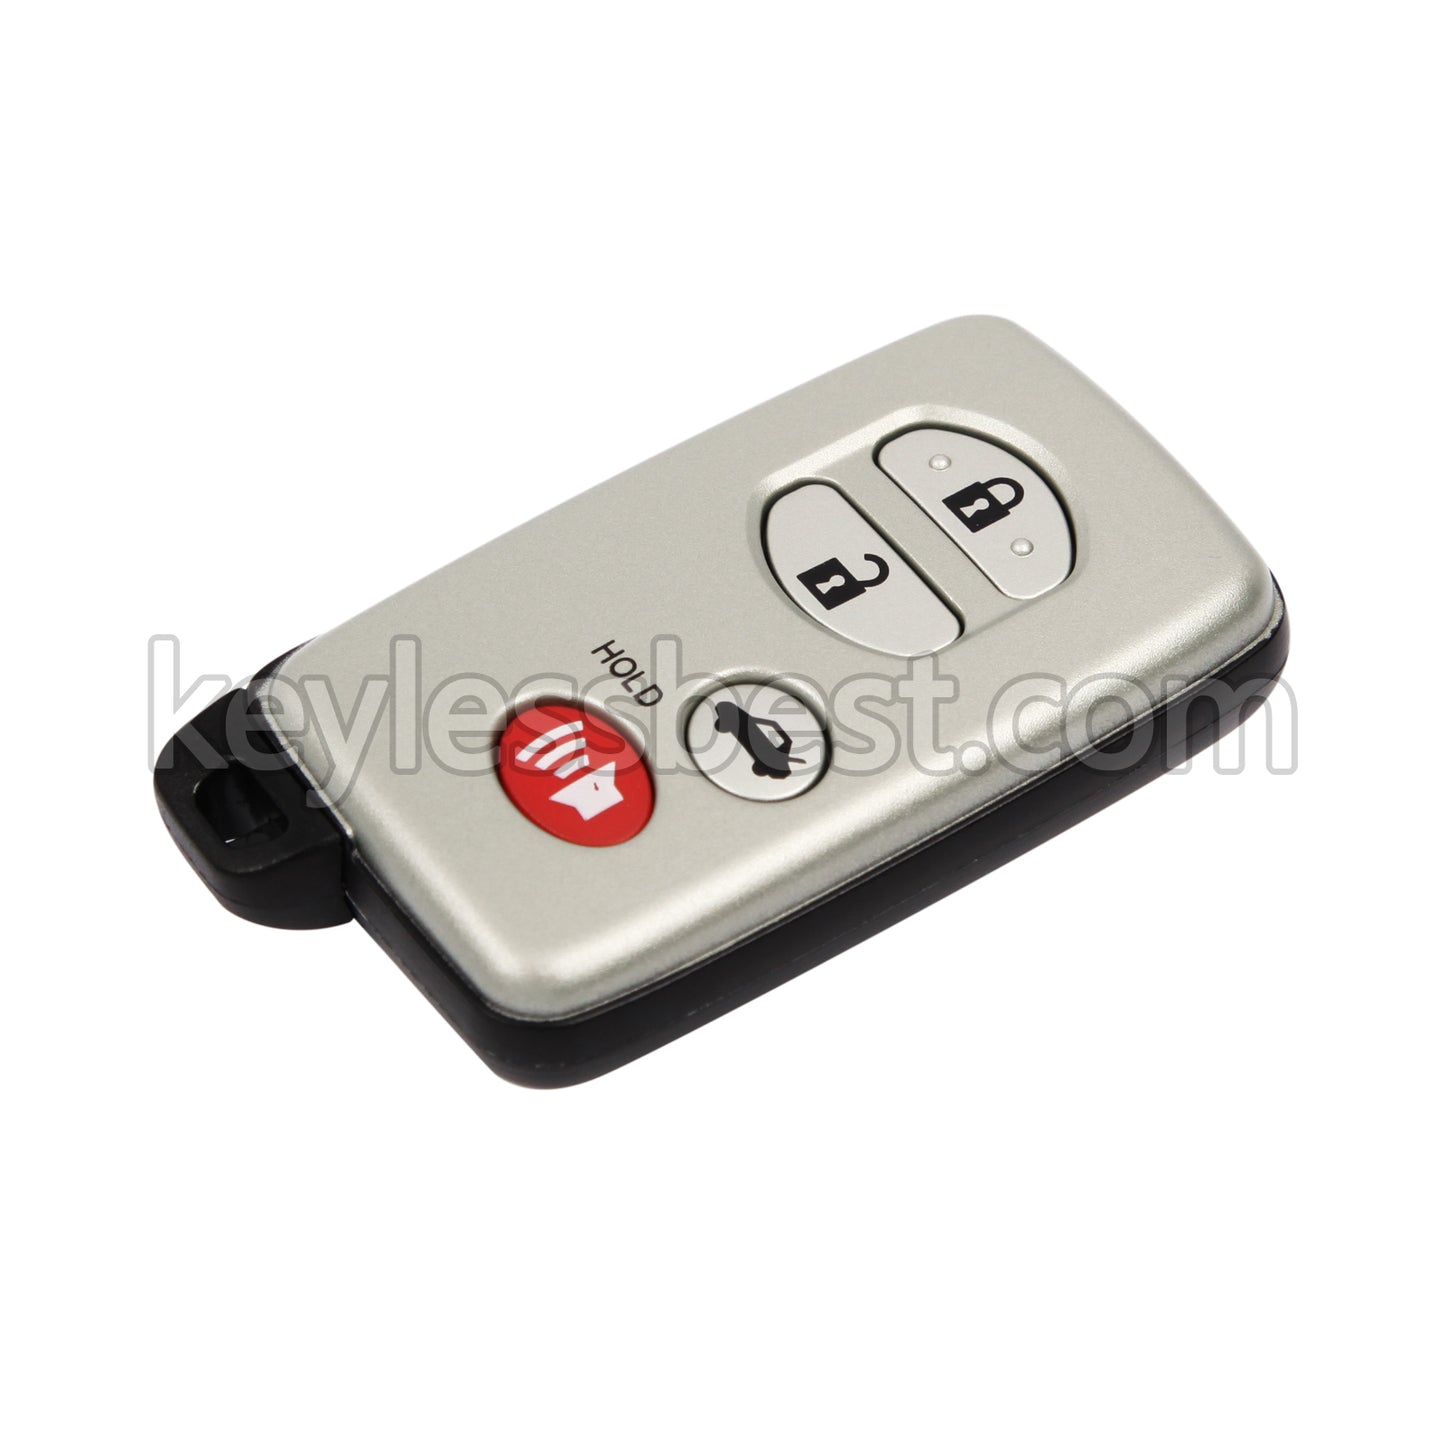 2007 - 2010 Toyota Avalon Limited Camry Hybrid / 4 Buttons Remote Key / HYQ14AAB / 315MHz